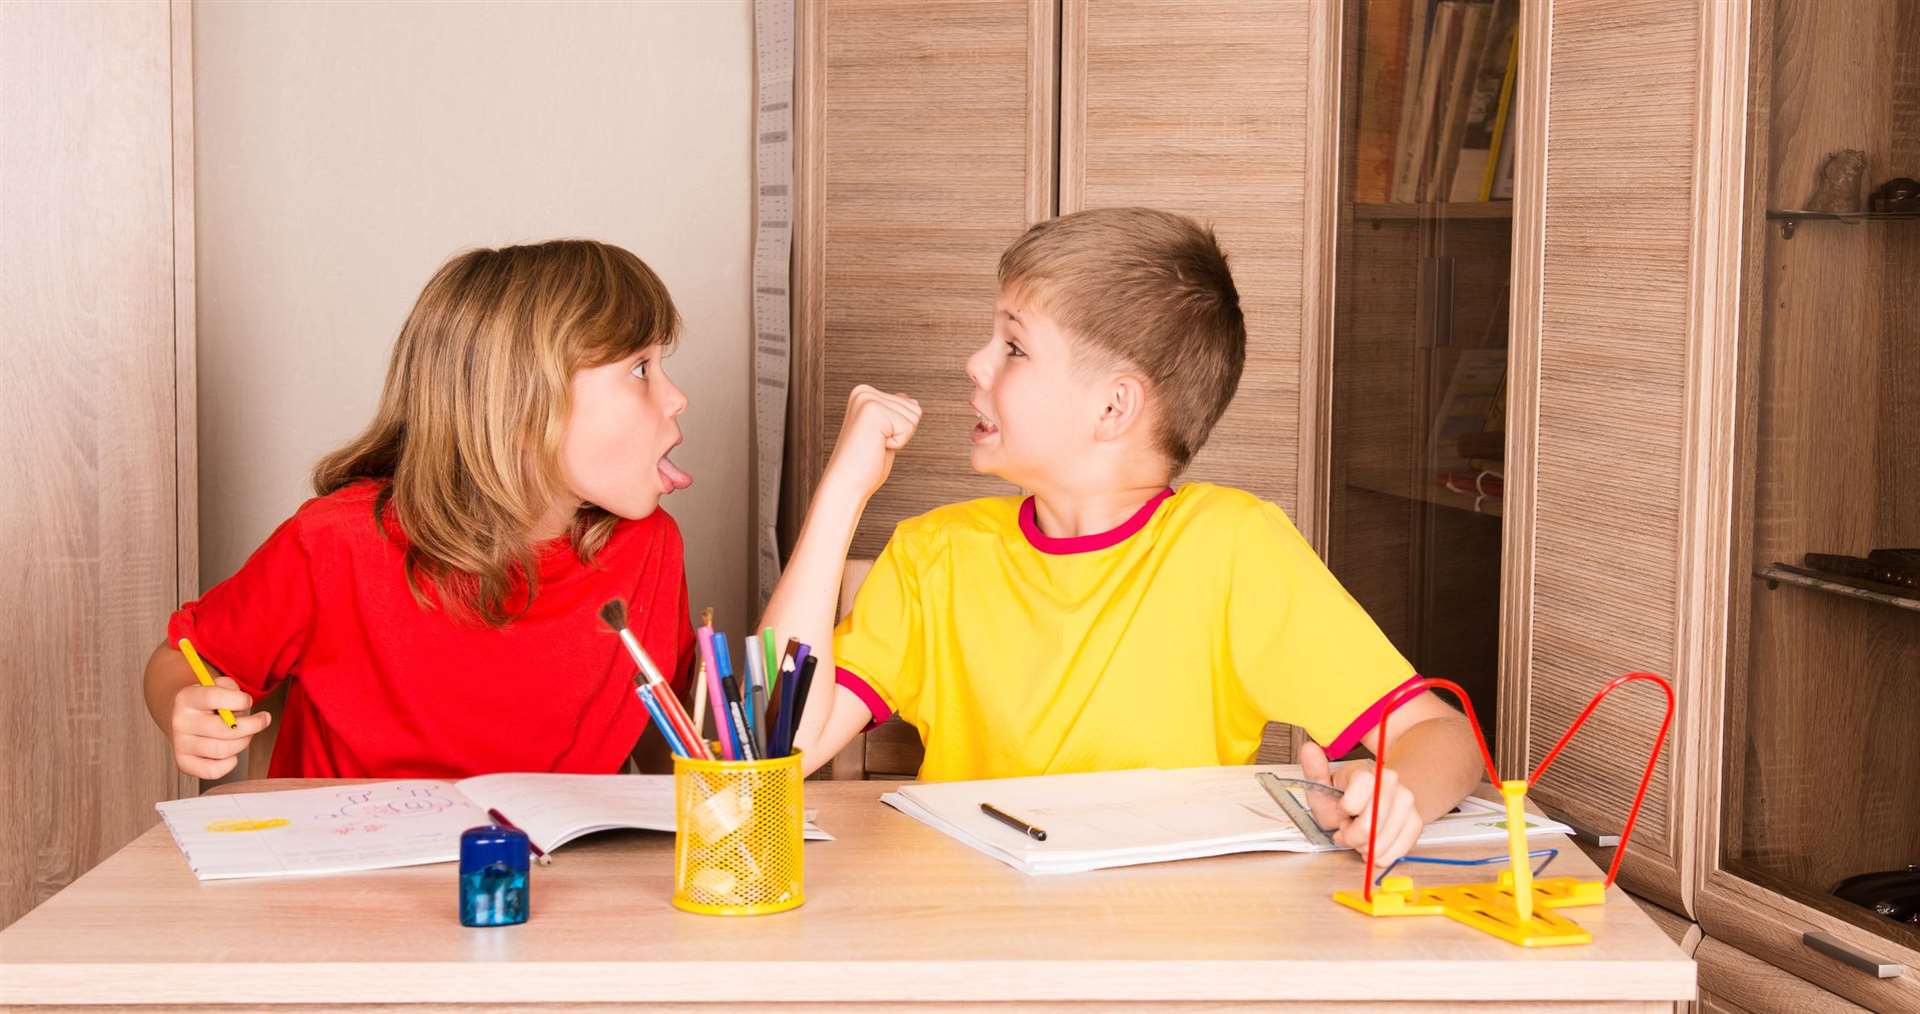 Would your children bicker and argue if left without an adult to manage the situation? Photo: Stock photo.